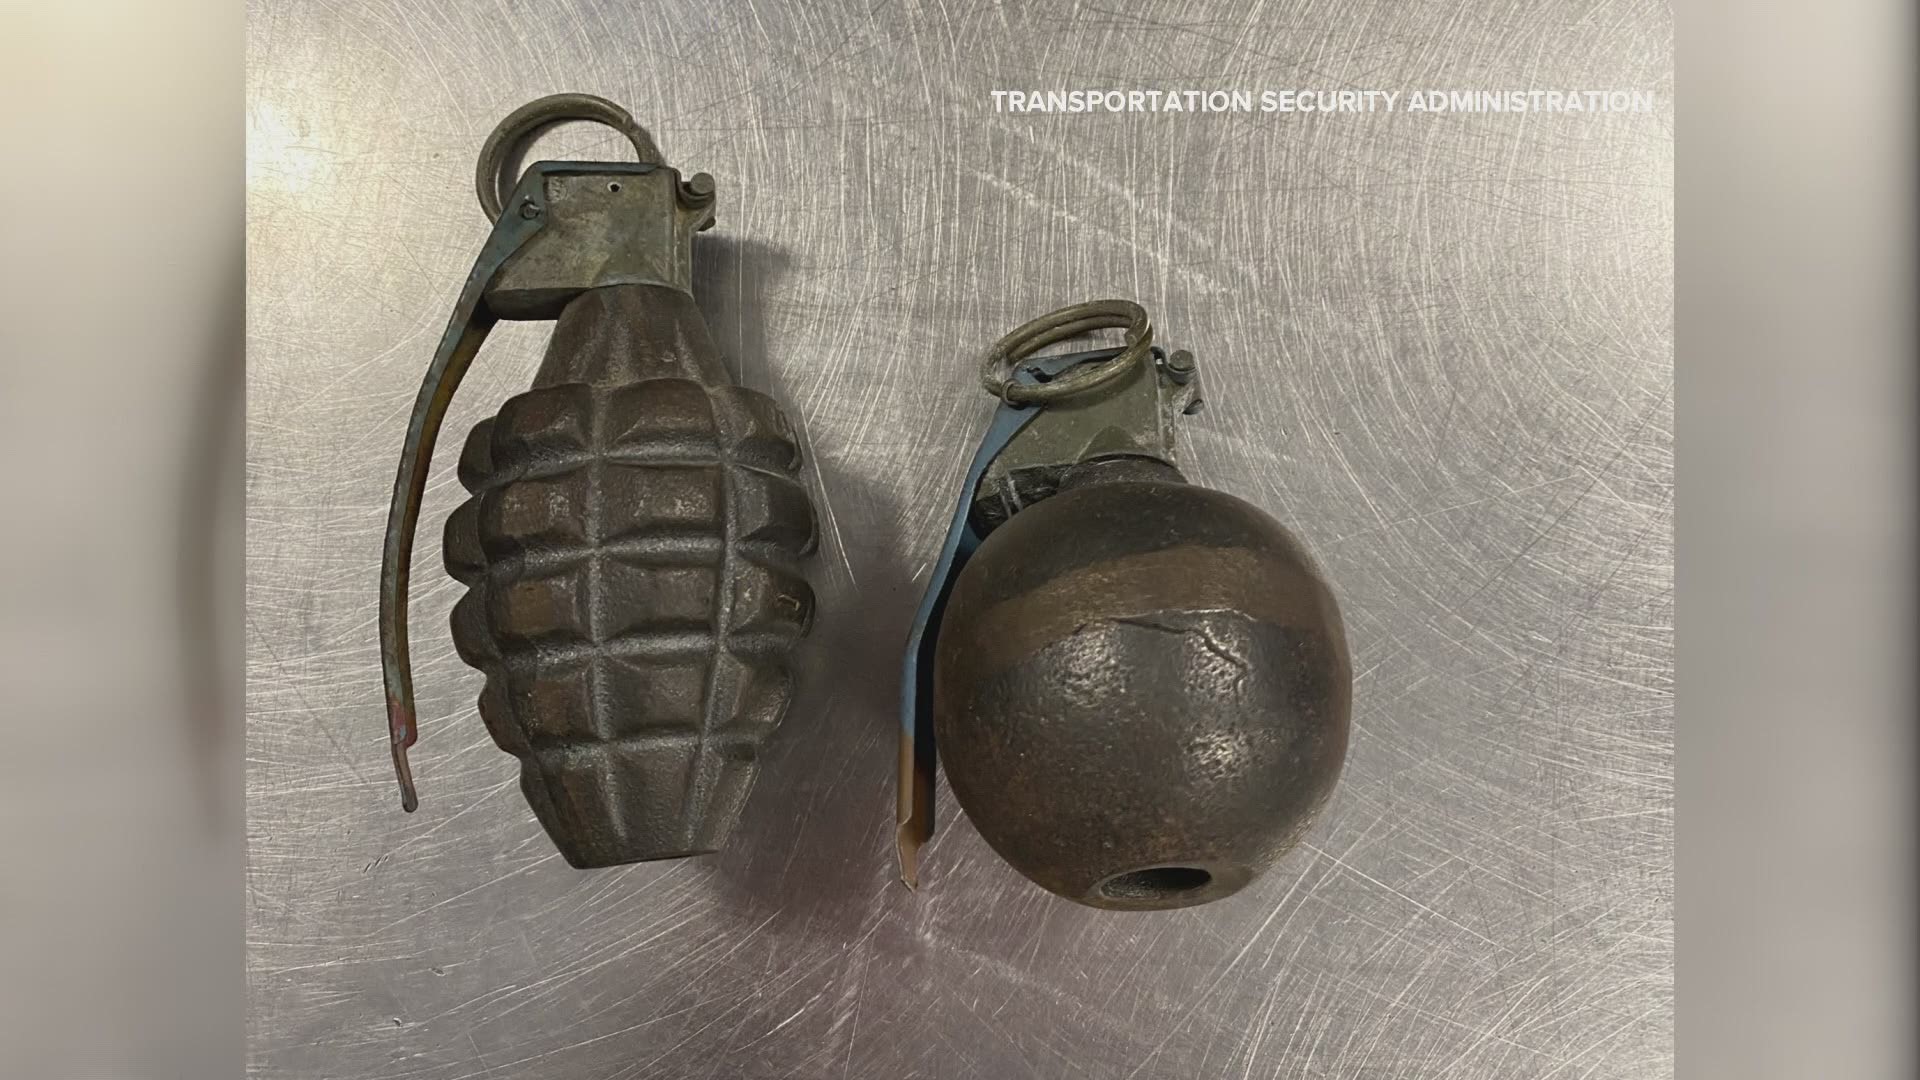 Two replica hand grenades were discovered while TSA was checking baggage.